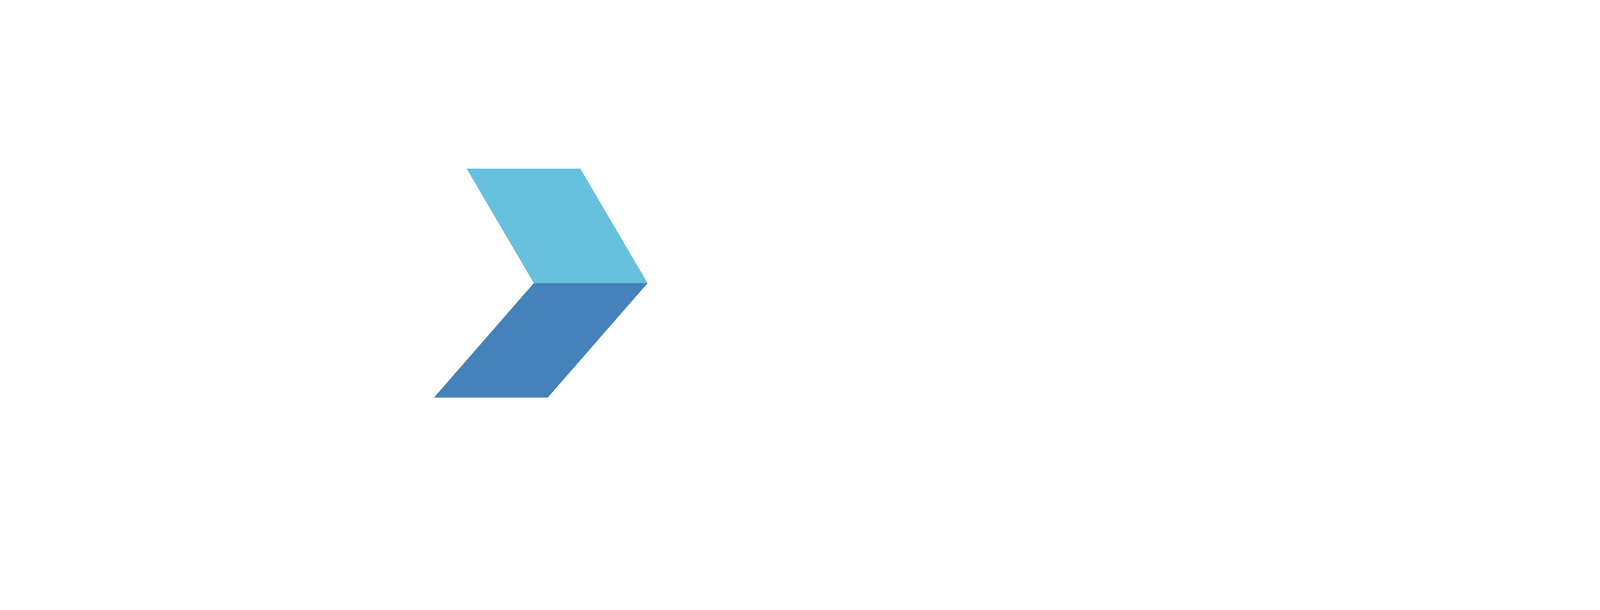 Opto by KPI Solutions Logo